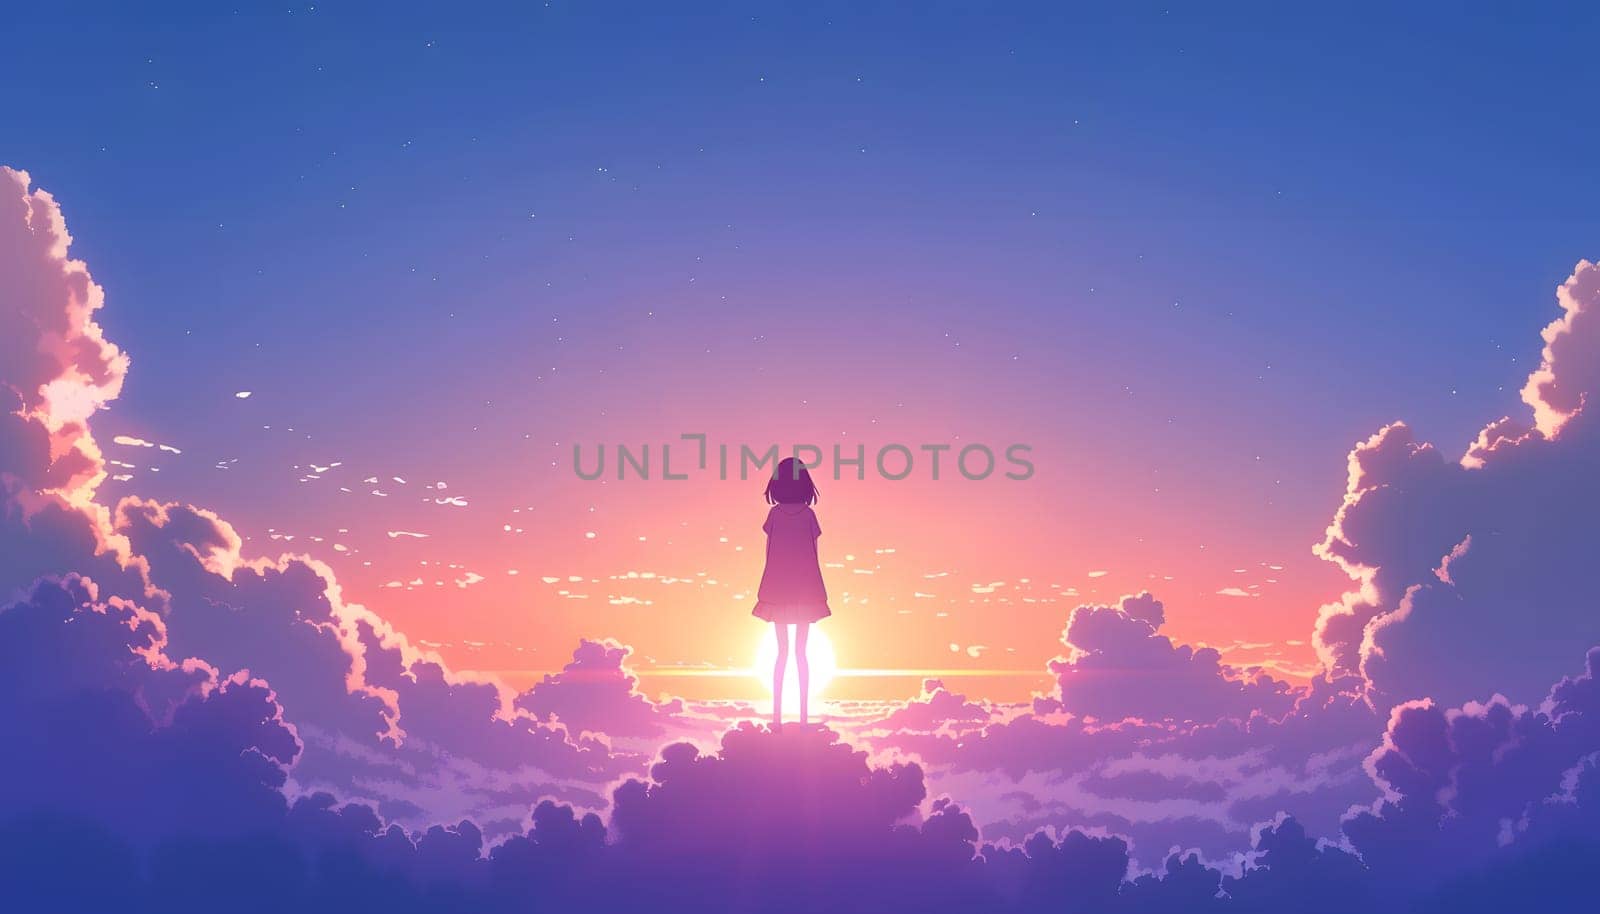 A girl stands amidst the clouds in the sky at dusk, surrounded by a violet afterglow. Her gesture blends with the natural landscape of water and atmosphere in the world